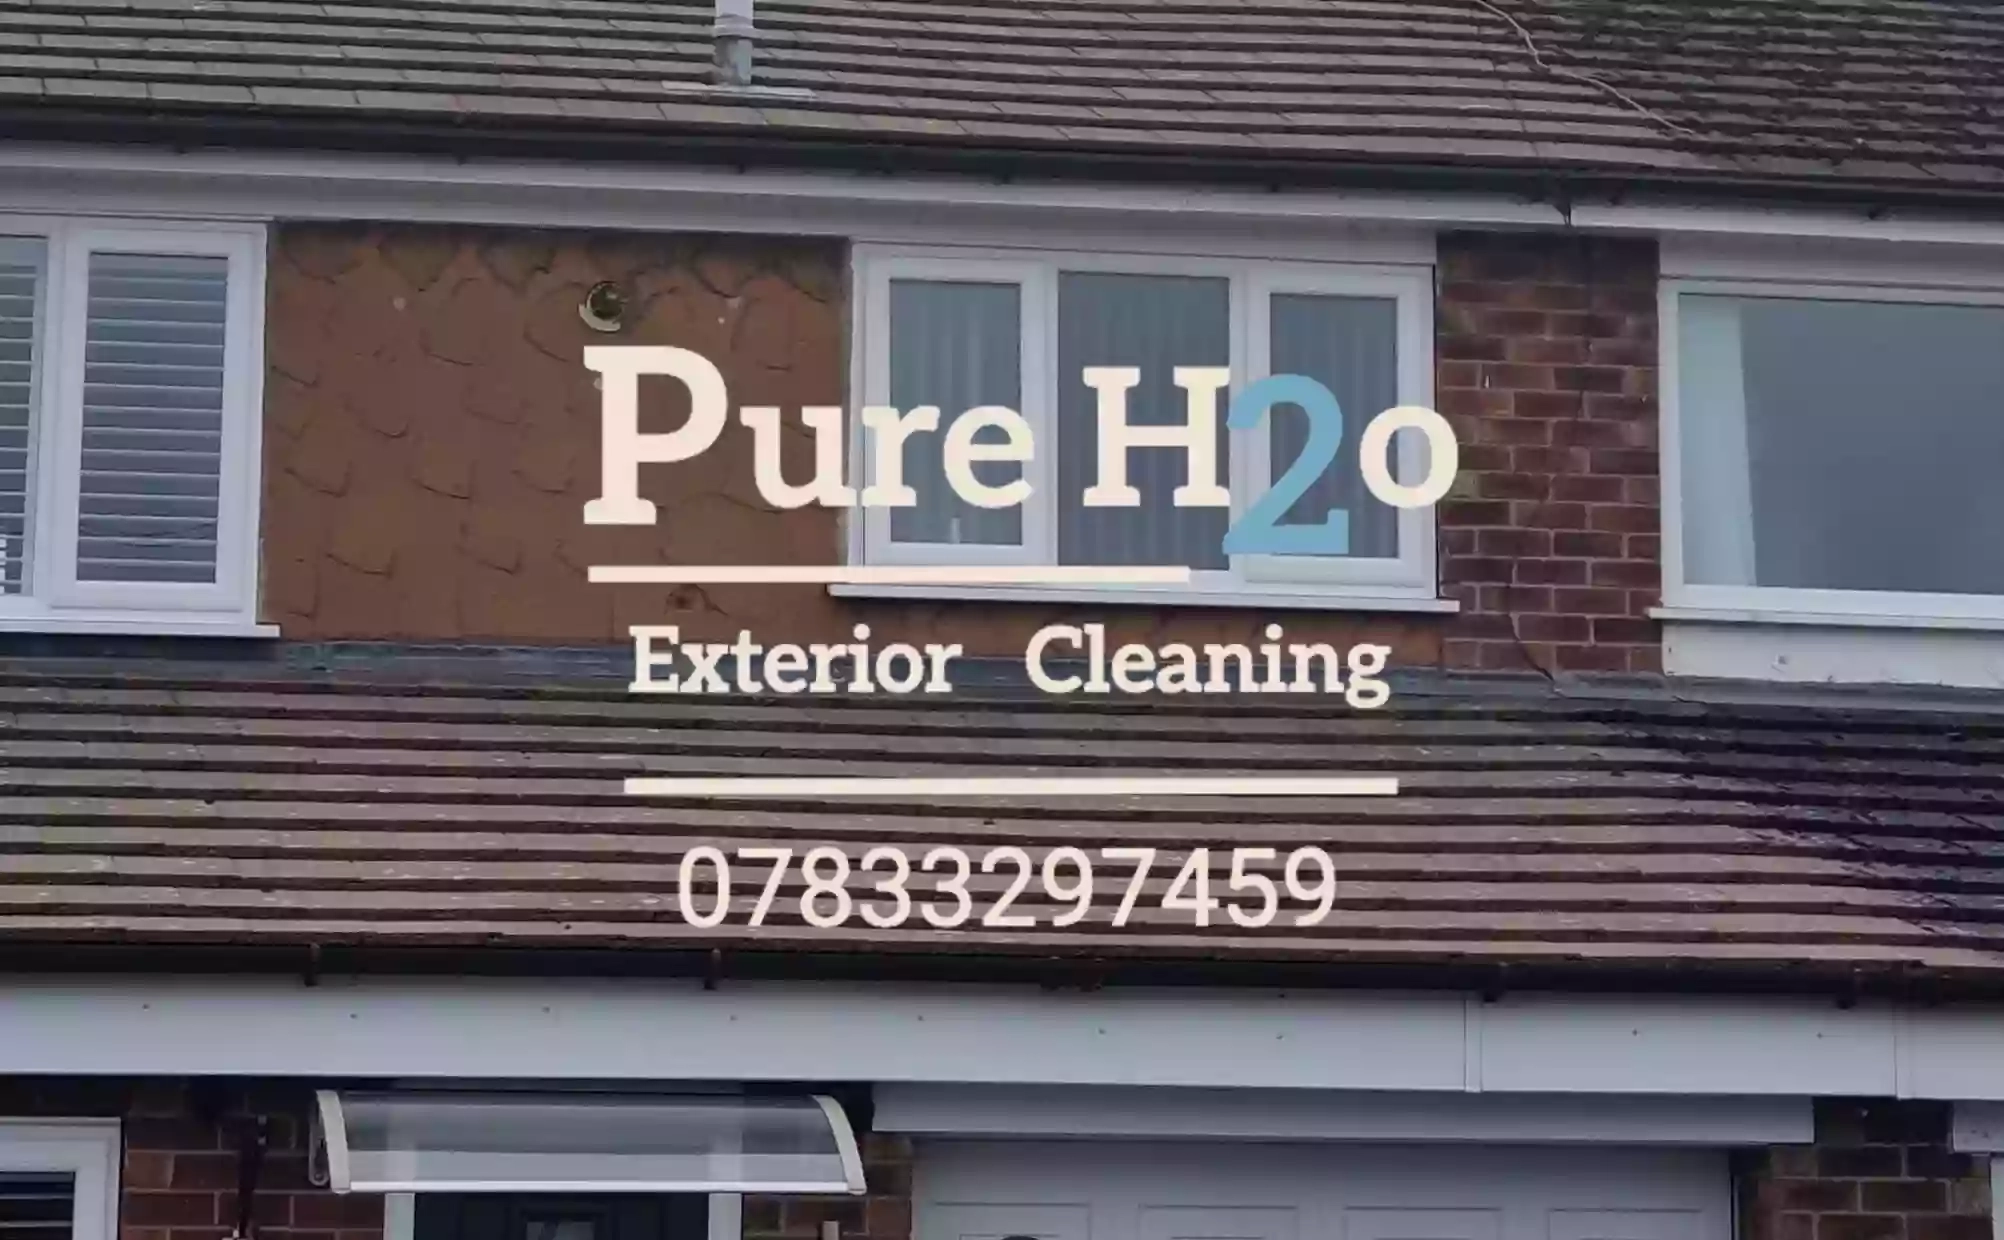 PureH2O Exterior Cleaning.